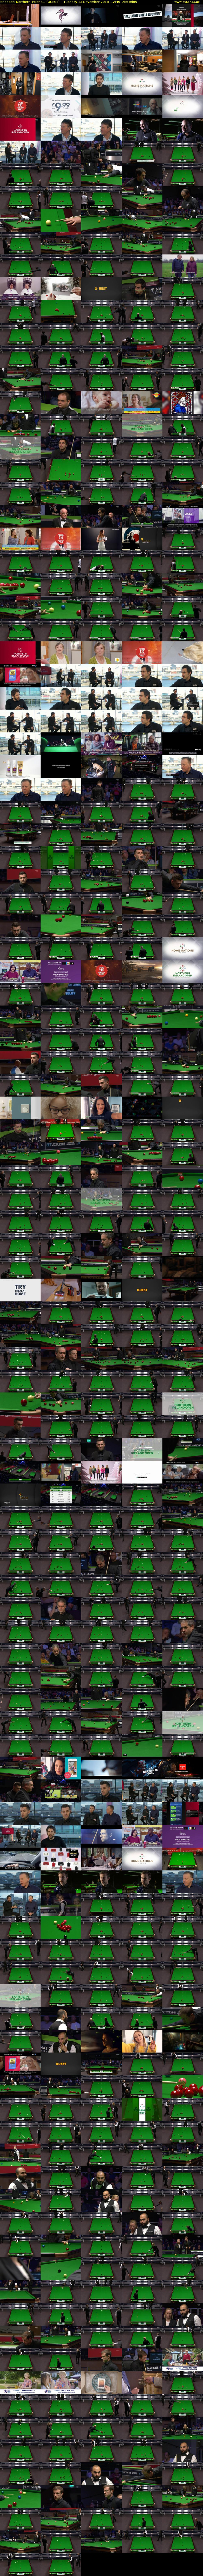 Snooker: Northern Ireland... (QUEST) Tuesday 13 November 2018 12:45 - 17:30